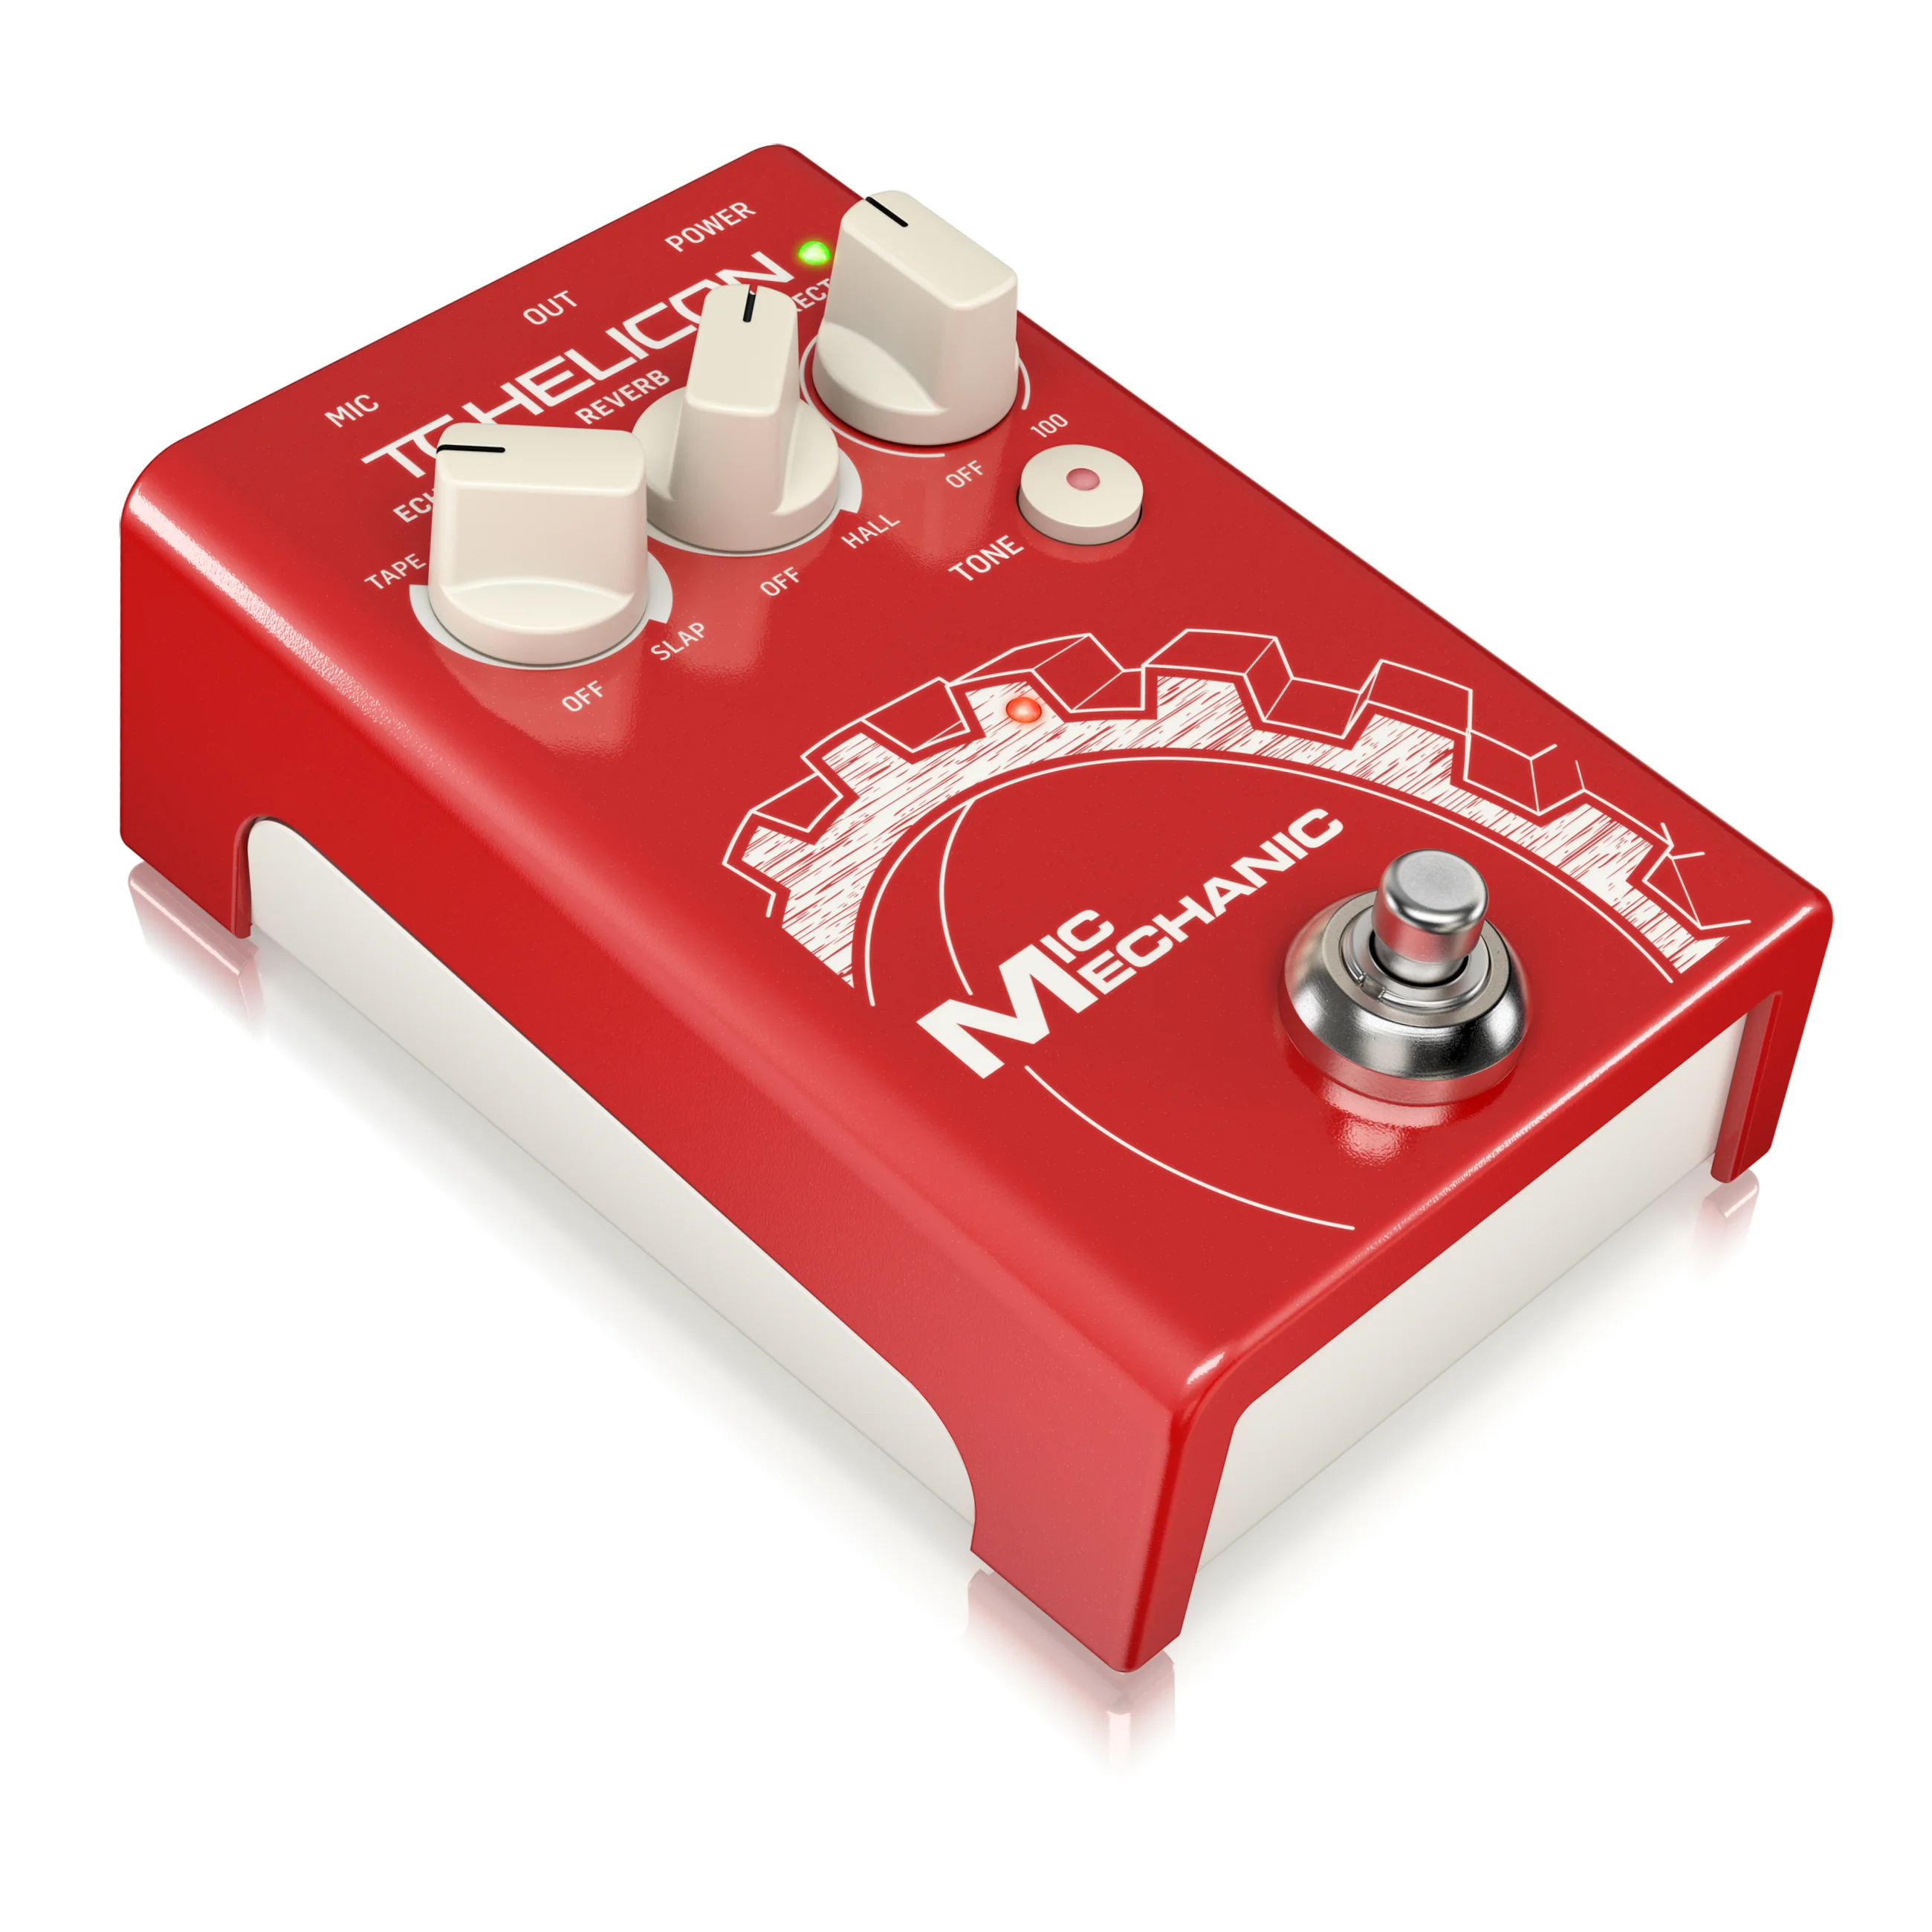 TC-Helicon Mic Mechanic 2 Ultra-simple vocal effects stompbox with  reverb,echo and pitch correction for pristine vocals